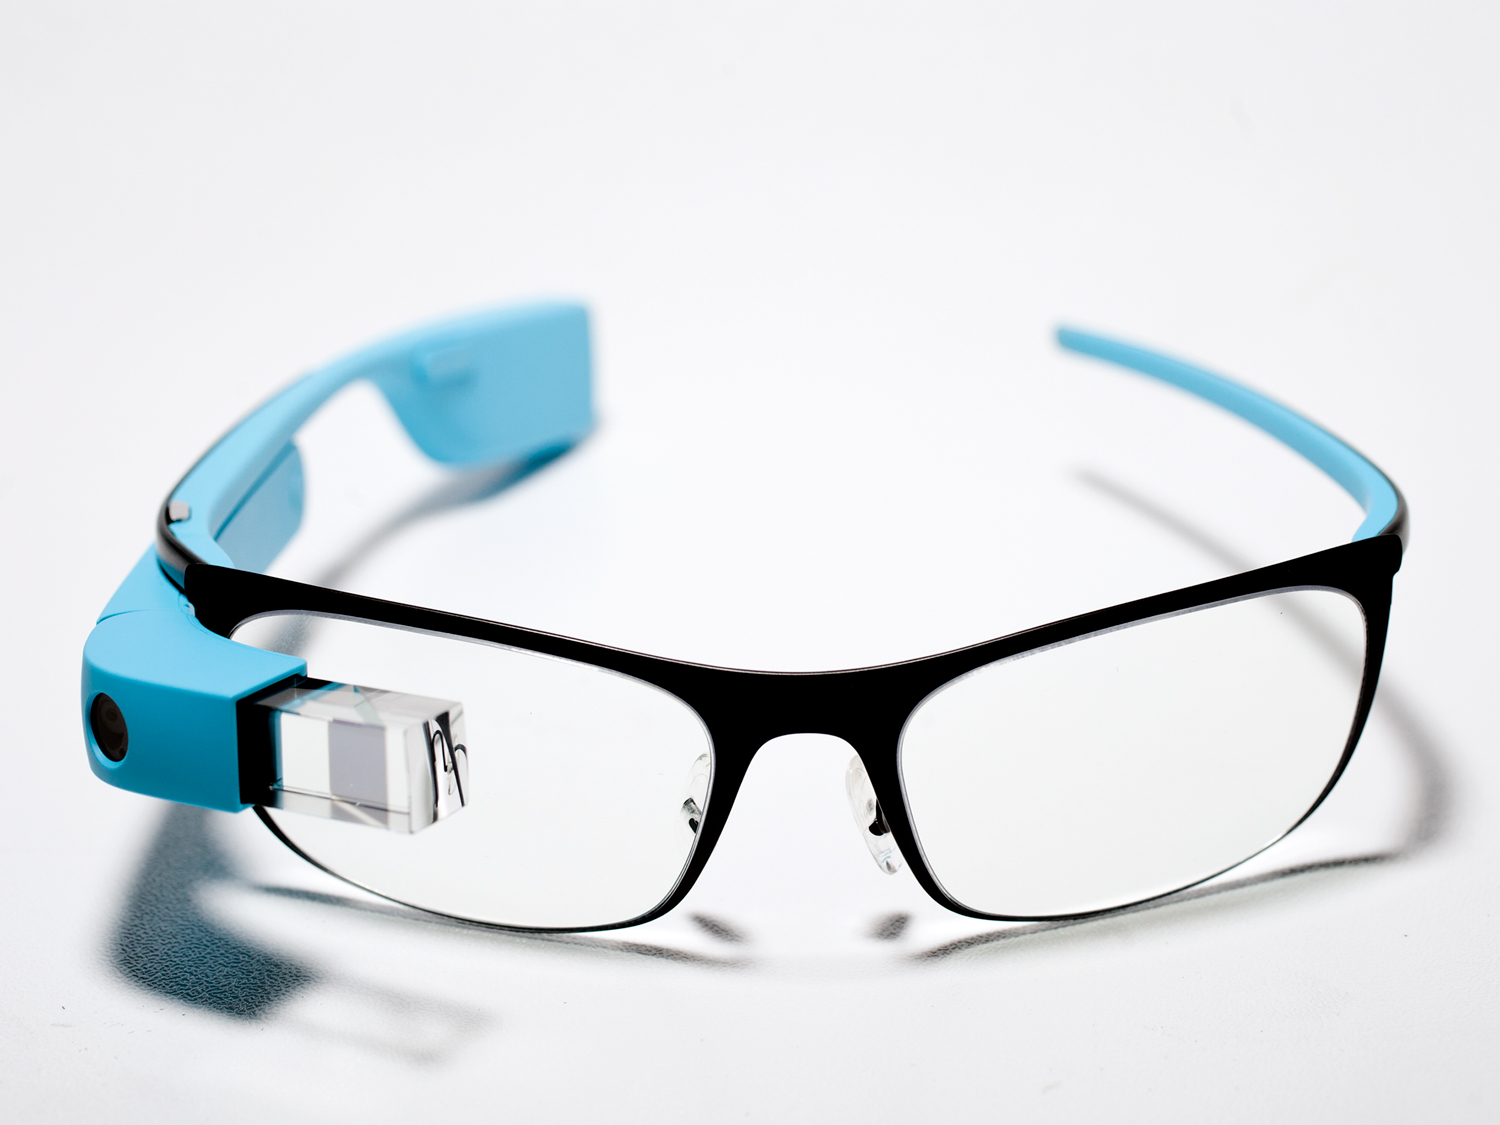 Google Glass may teach you Morse code within hours!